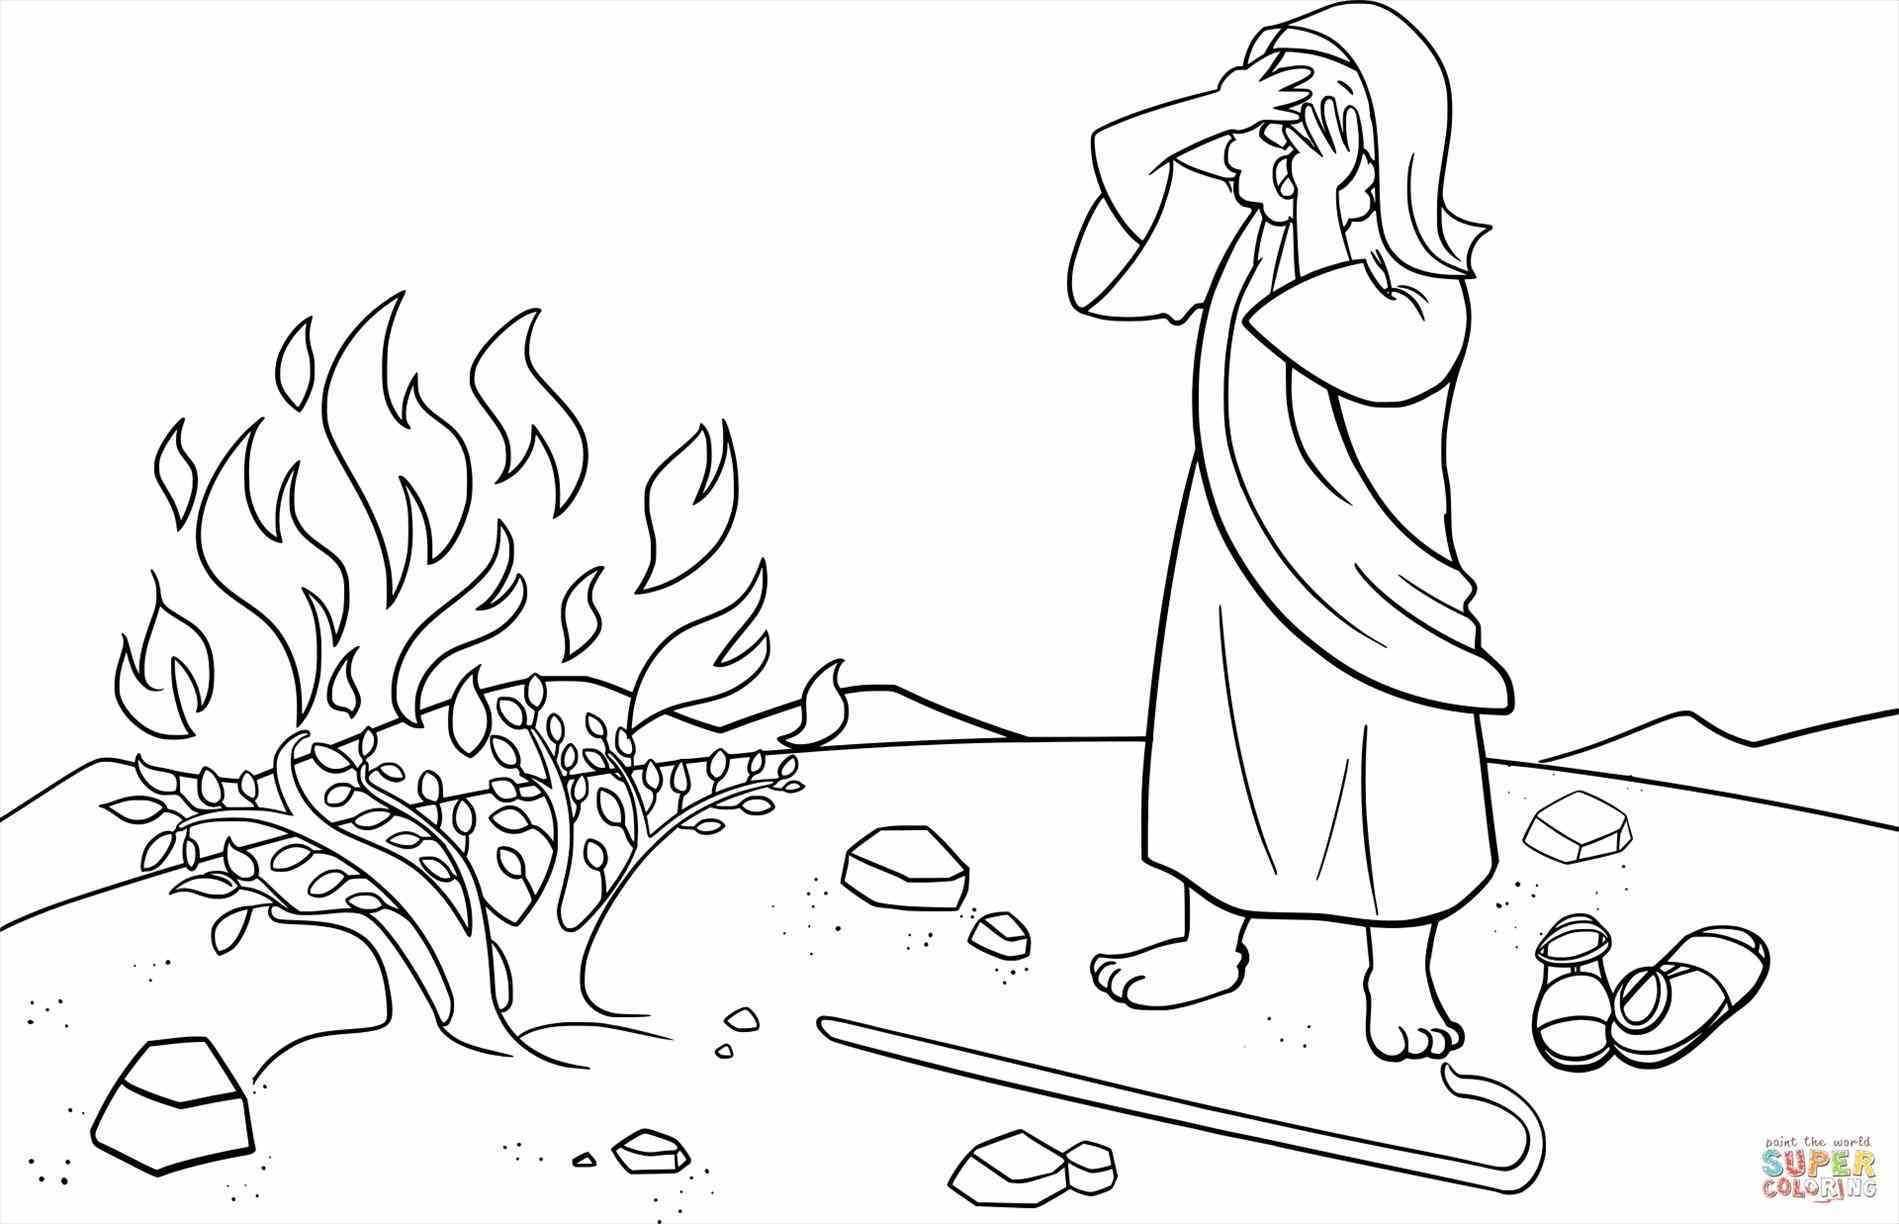 Joshua Fought The Battle Of Jericho Coloring Page Collection Joshua Tree Coloring Pages For Adults Pictures